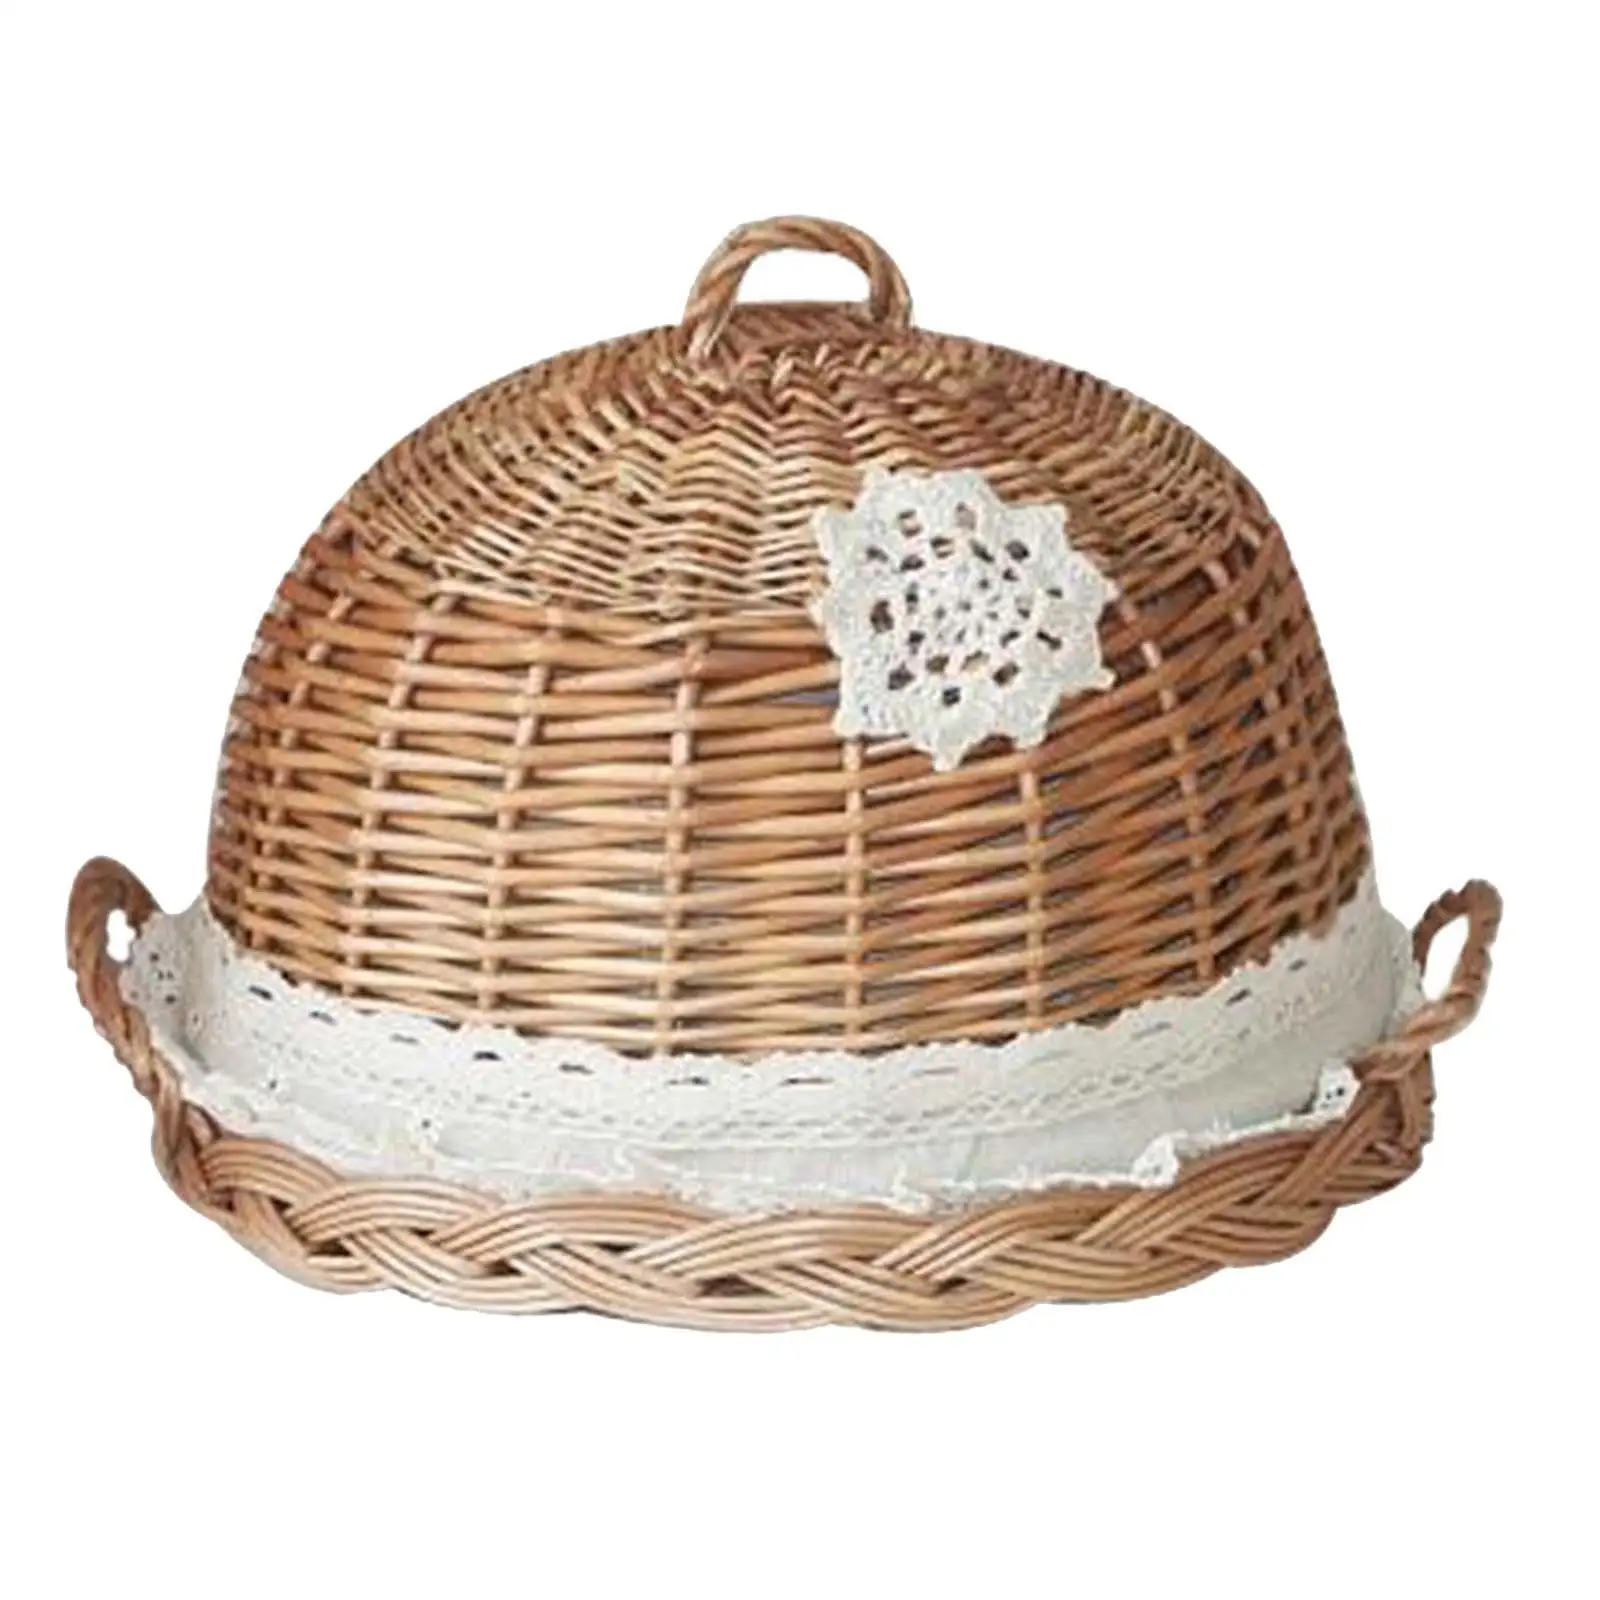 Food Dome Lid and Serving Tray Rattan Wicker Woven Brown 11.8inchx7.9inch